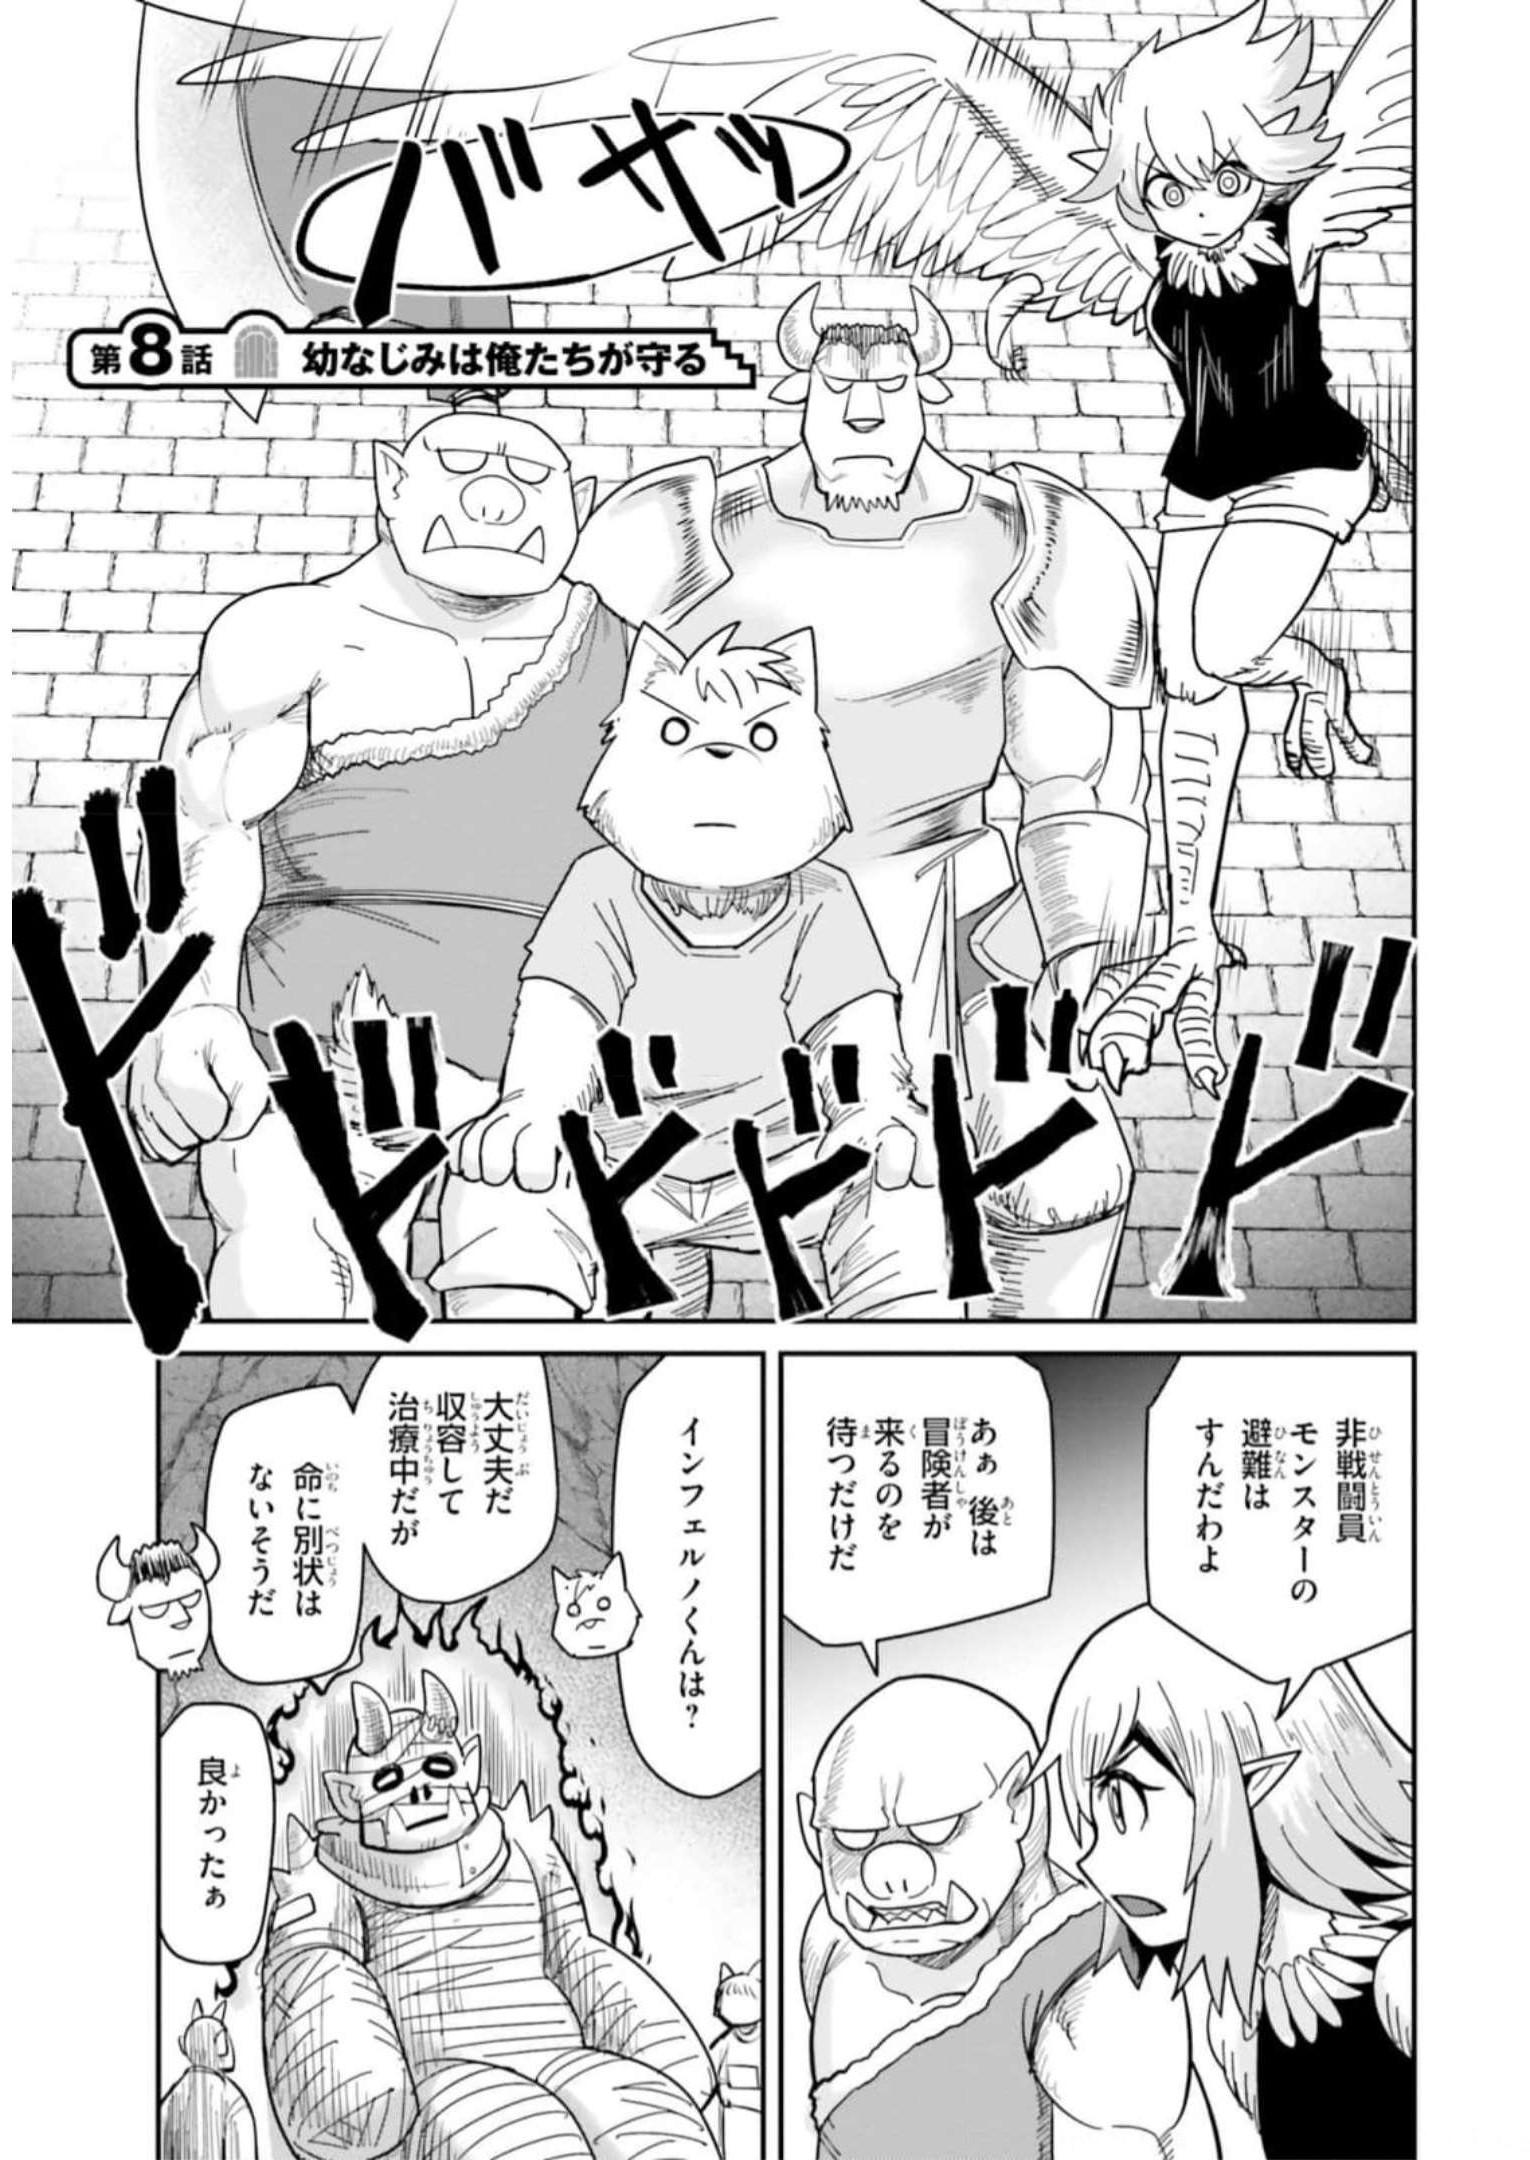 Dungeon Friends Forever Dungeon’s Childhood Friend ダンジョンの幼なじみ 第8話 - Page 3